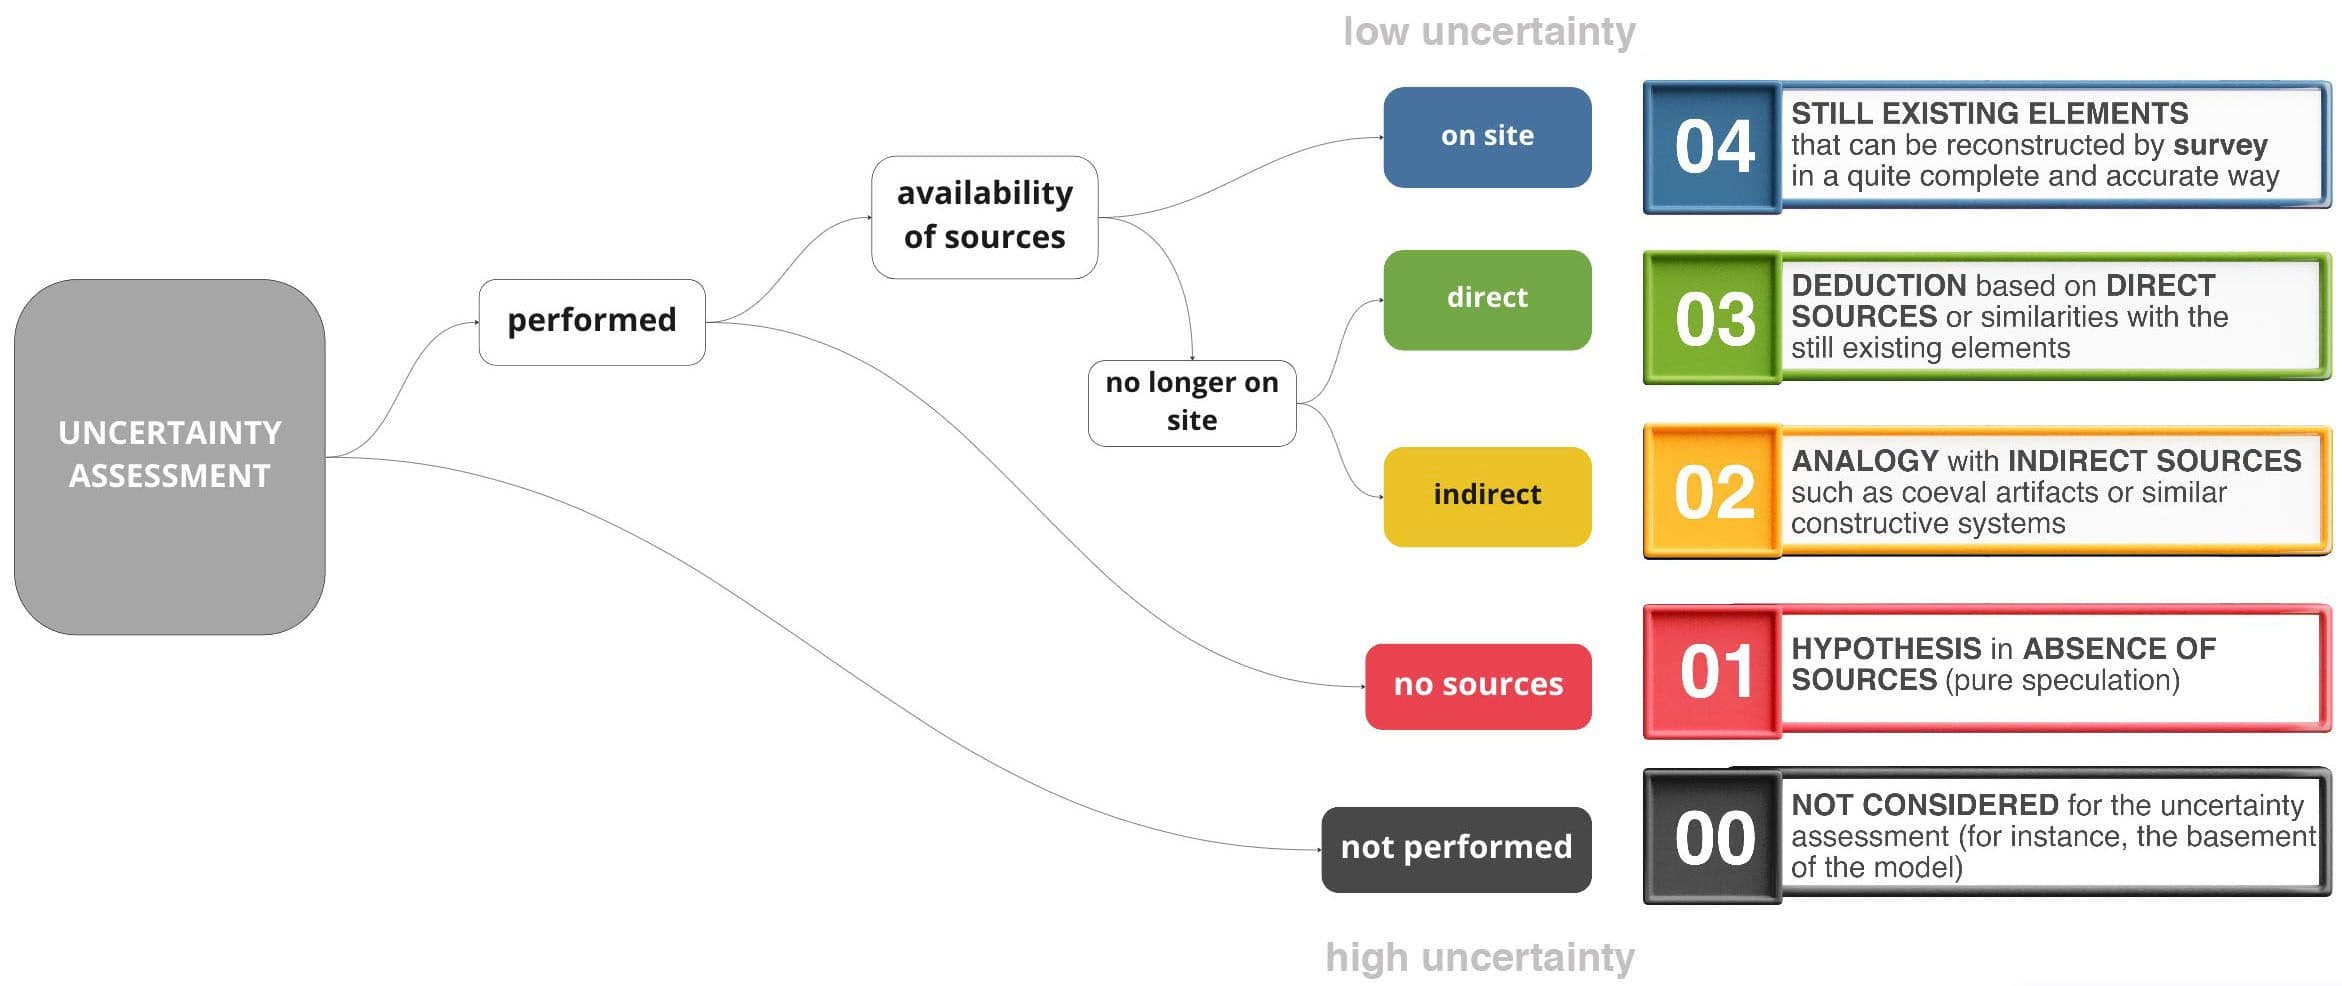 Picture of Fig. 2 Decisional process that leads to the definition of the uncertainty scale, from level 04 (blue) indicating low uncertainty to level 01 (red) indicating high uncertainty. Level 00 is added to refer to elements for which the uncertainty assessment is not performed.